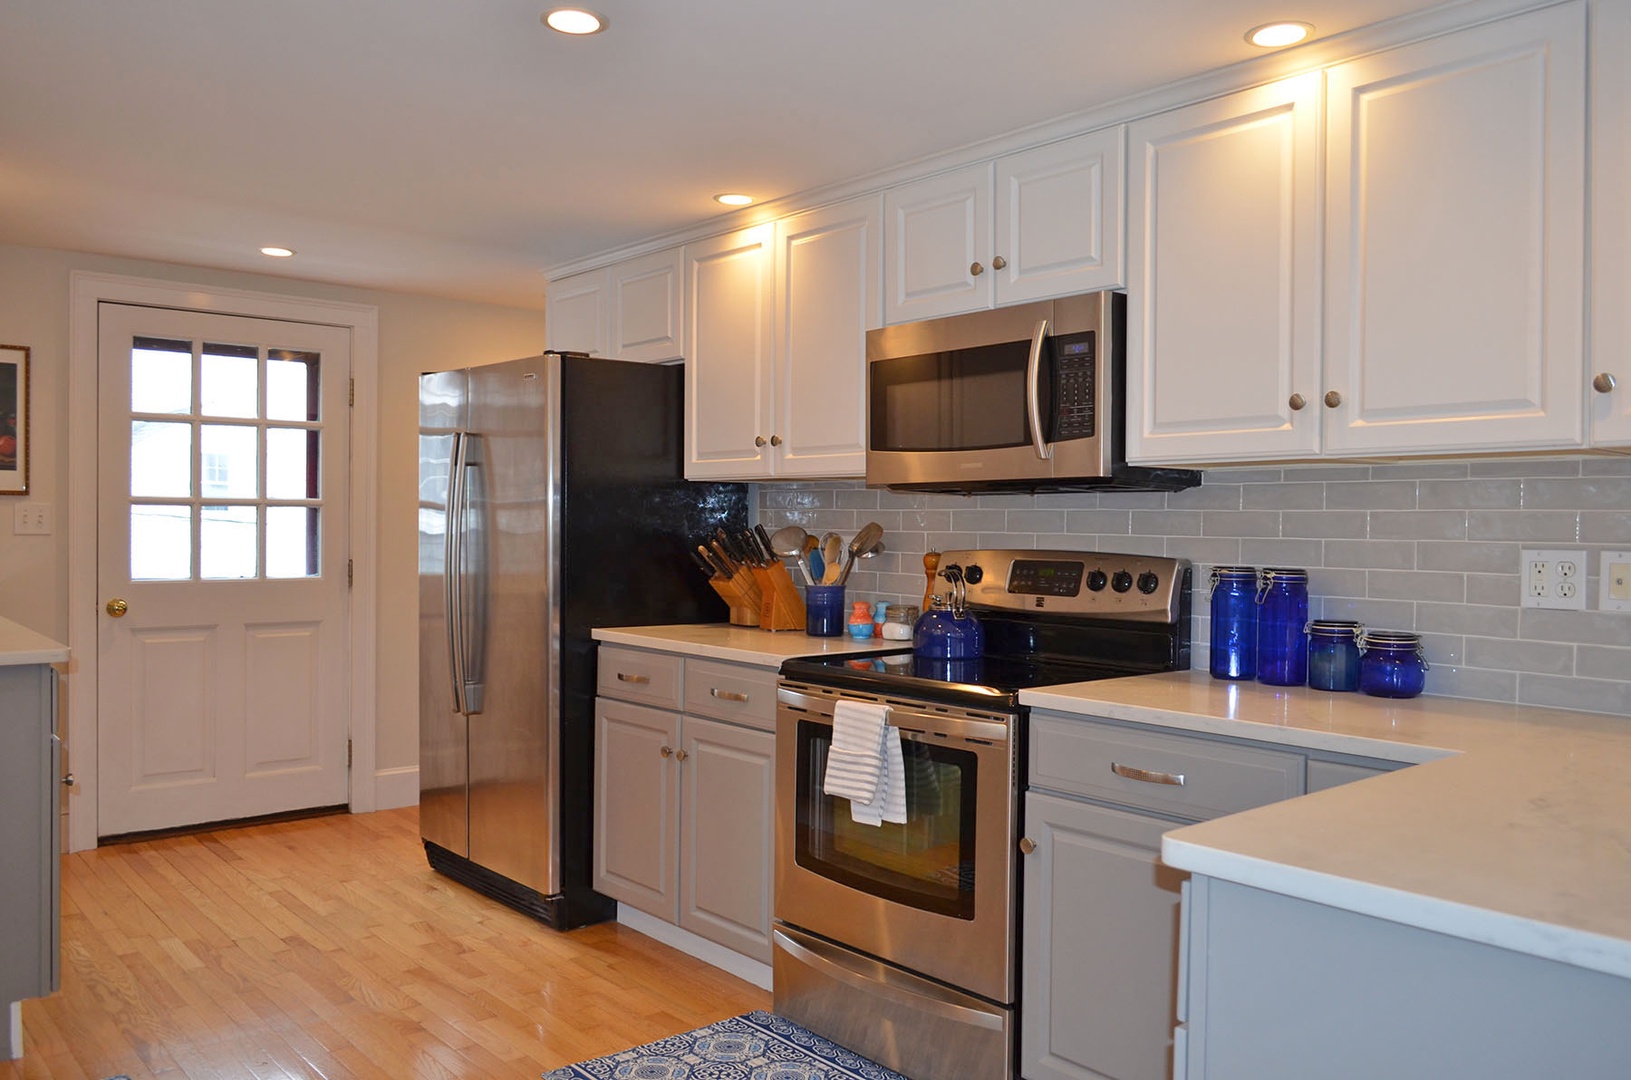 The contemporary kitchen has stainless steel appliances.